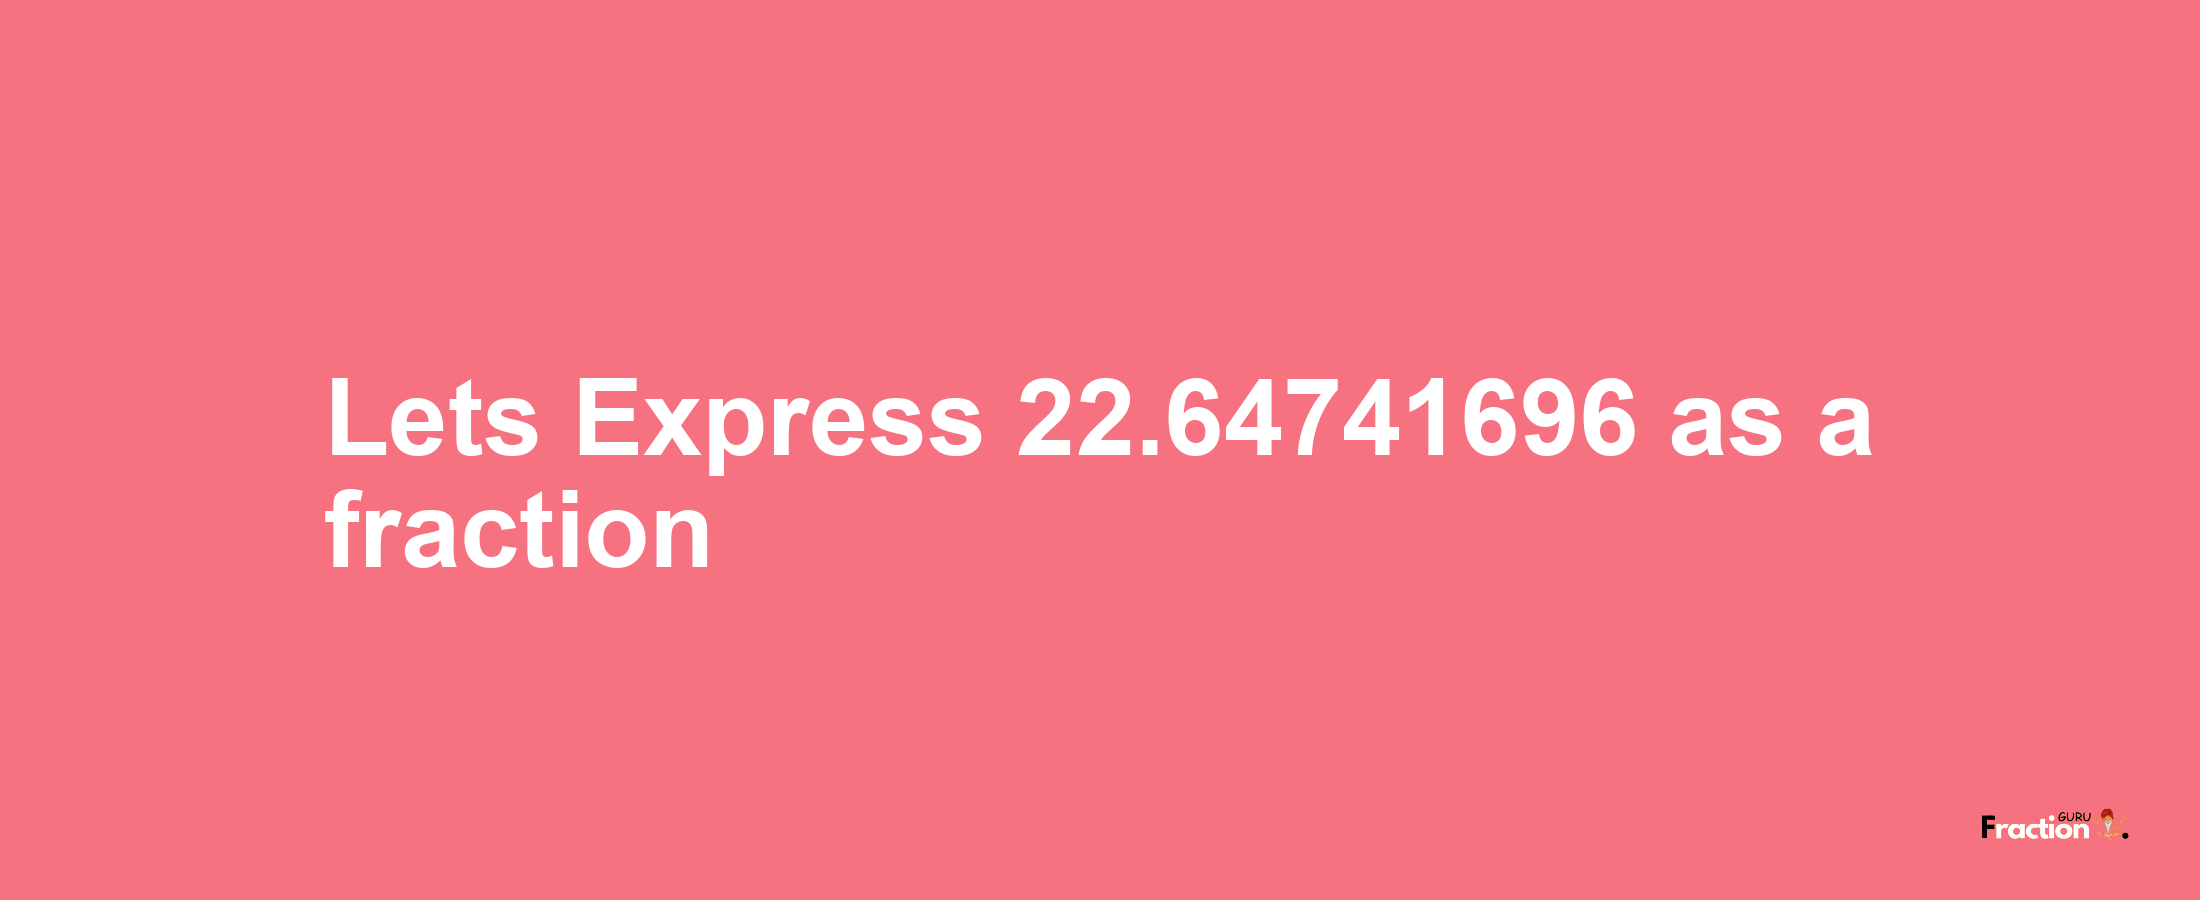 Lets Express 22.64741696 as afraction